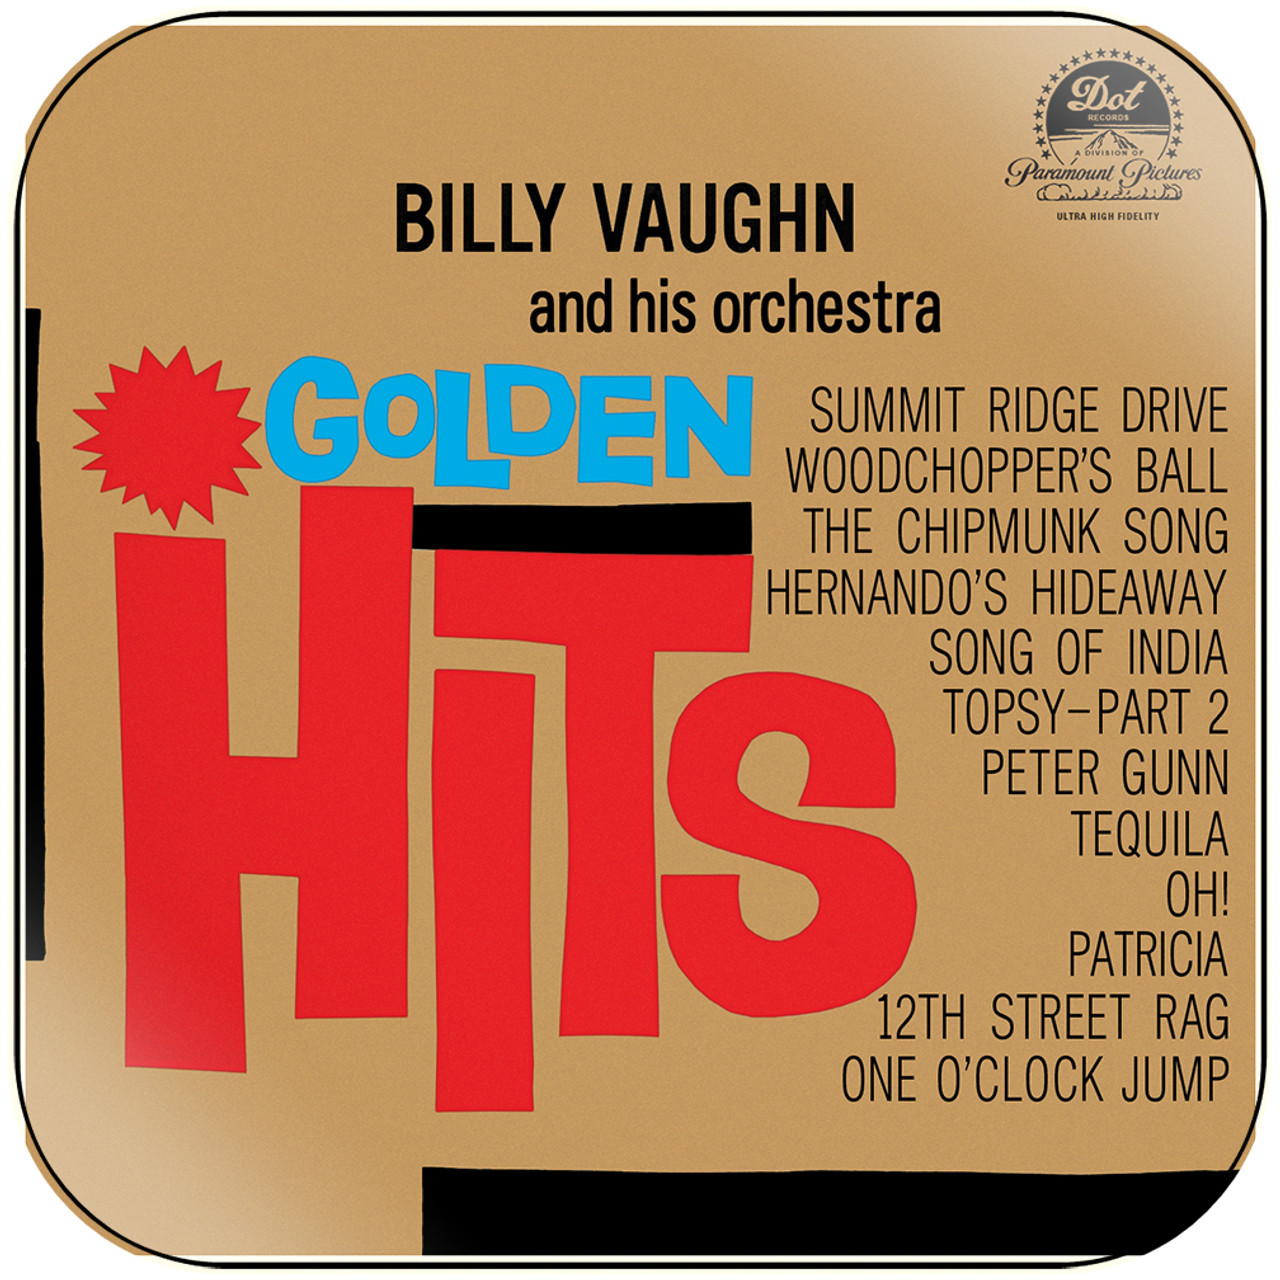 Hits　Sticker　Billy　His　Orchestra　and　Vaughn　Cover　Golden　Album